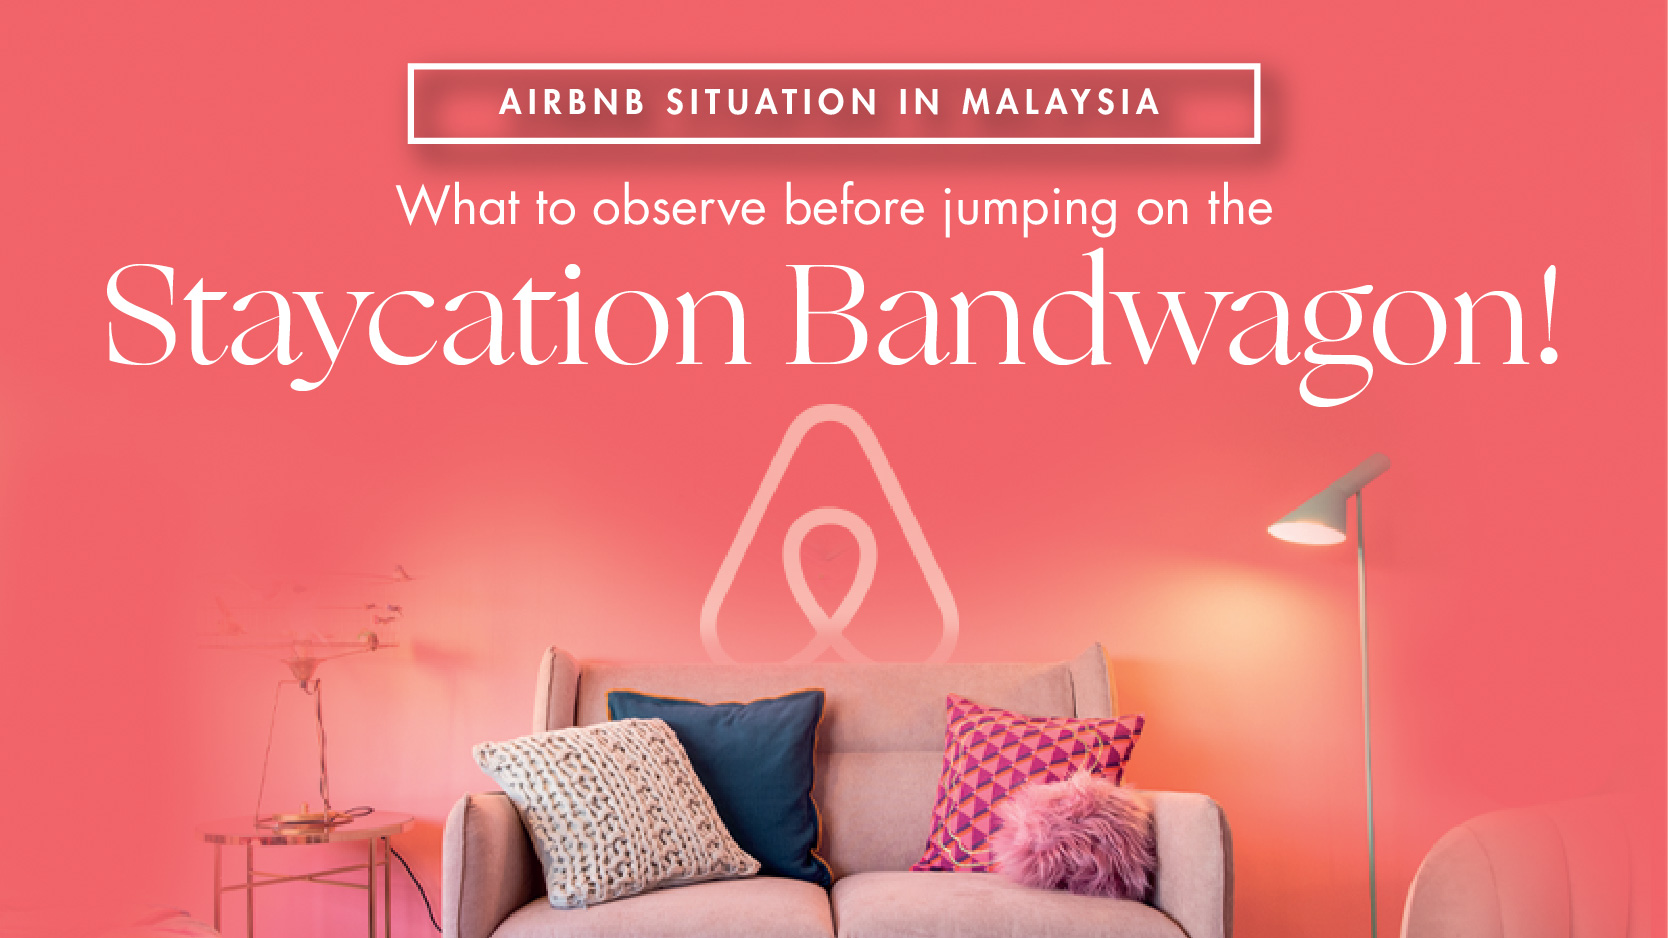 Airbnb situation in Malaysia, what to observe before jumping on the staycation bandwagon!